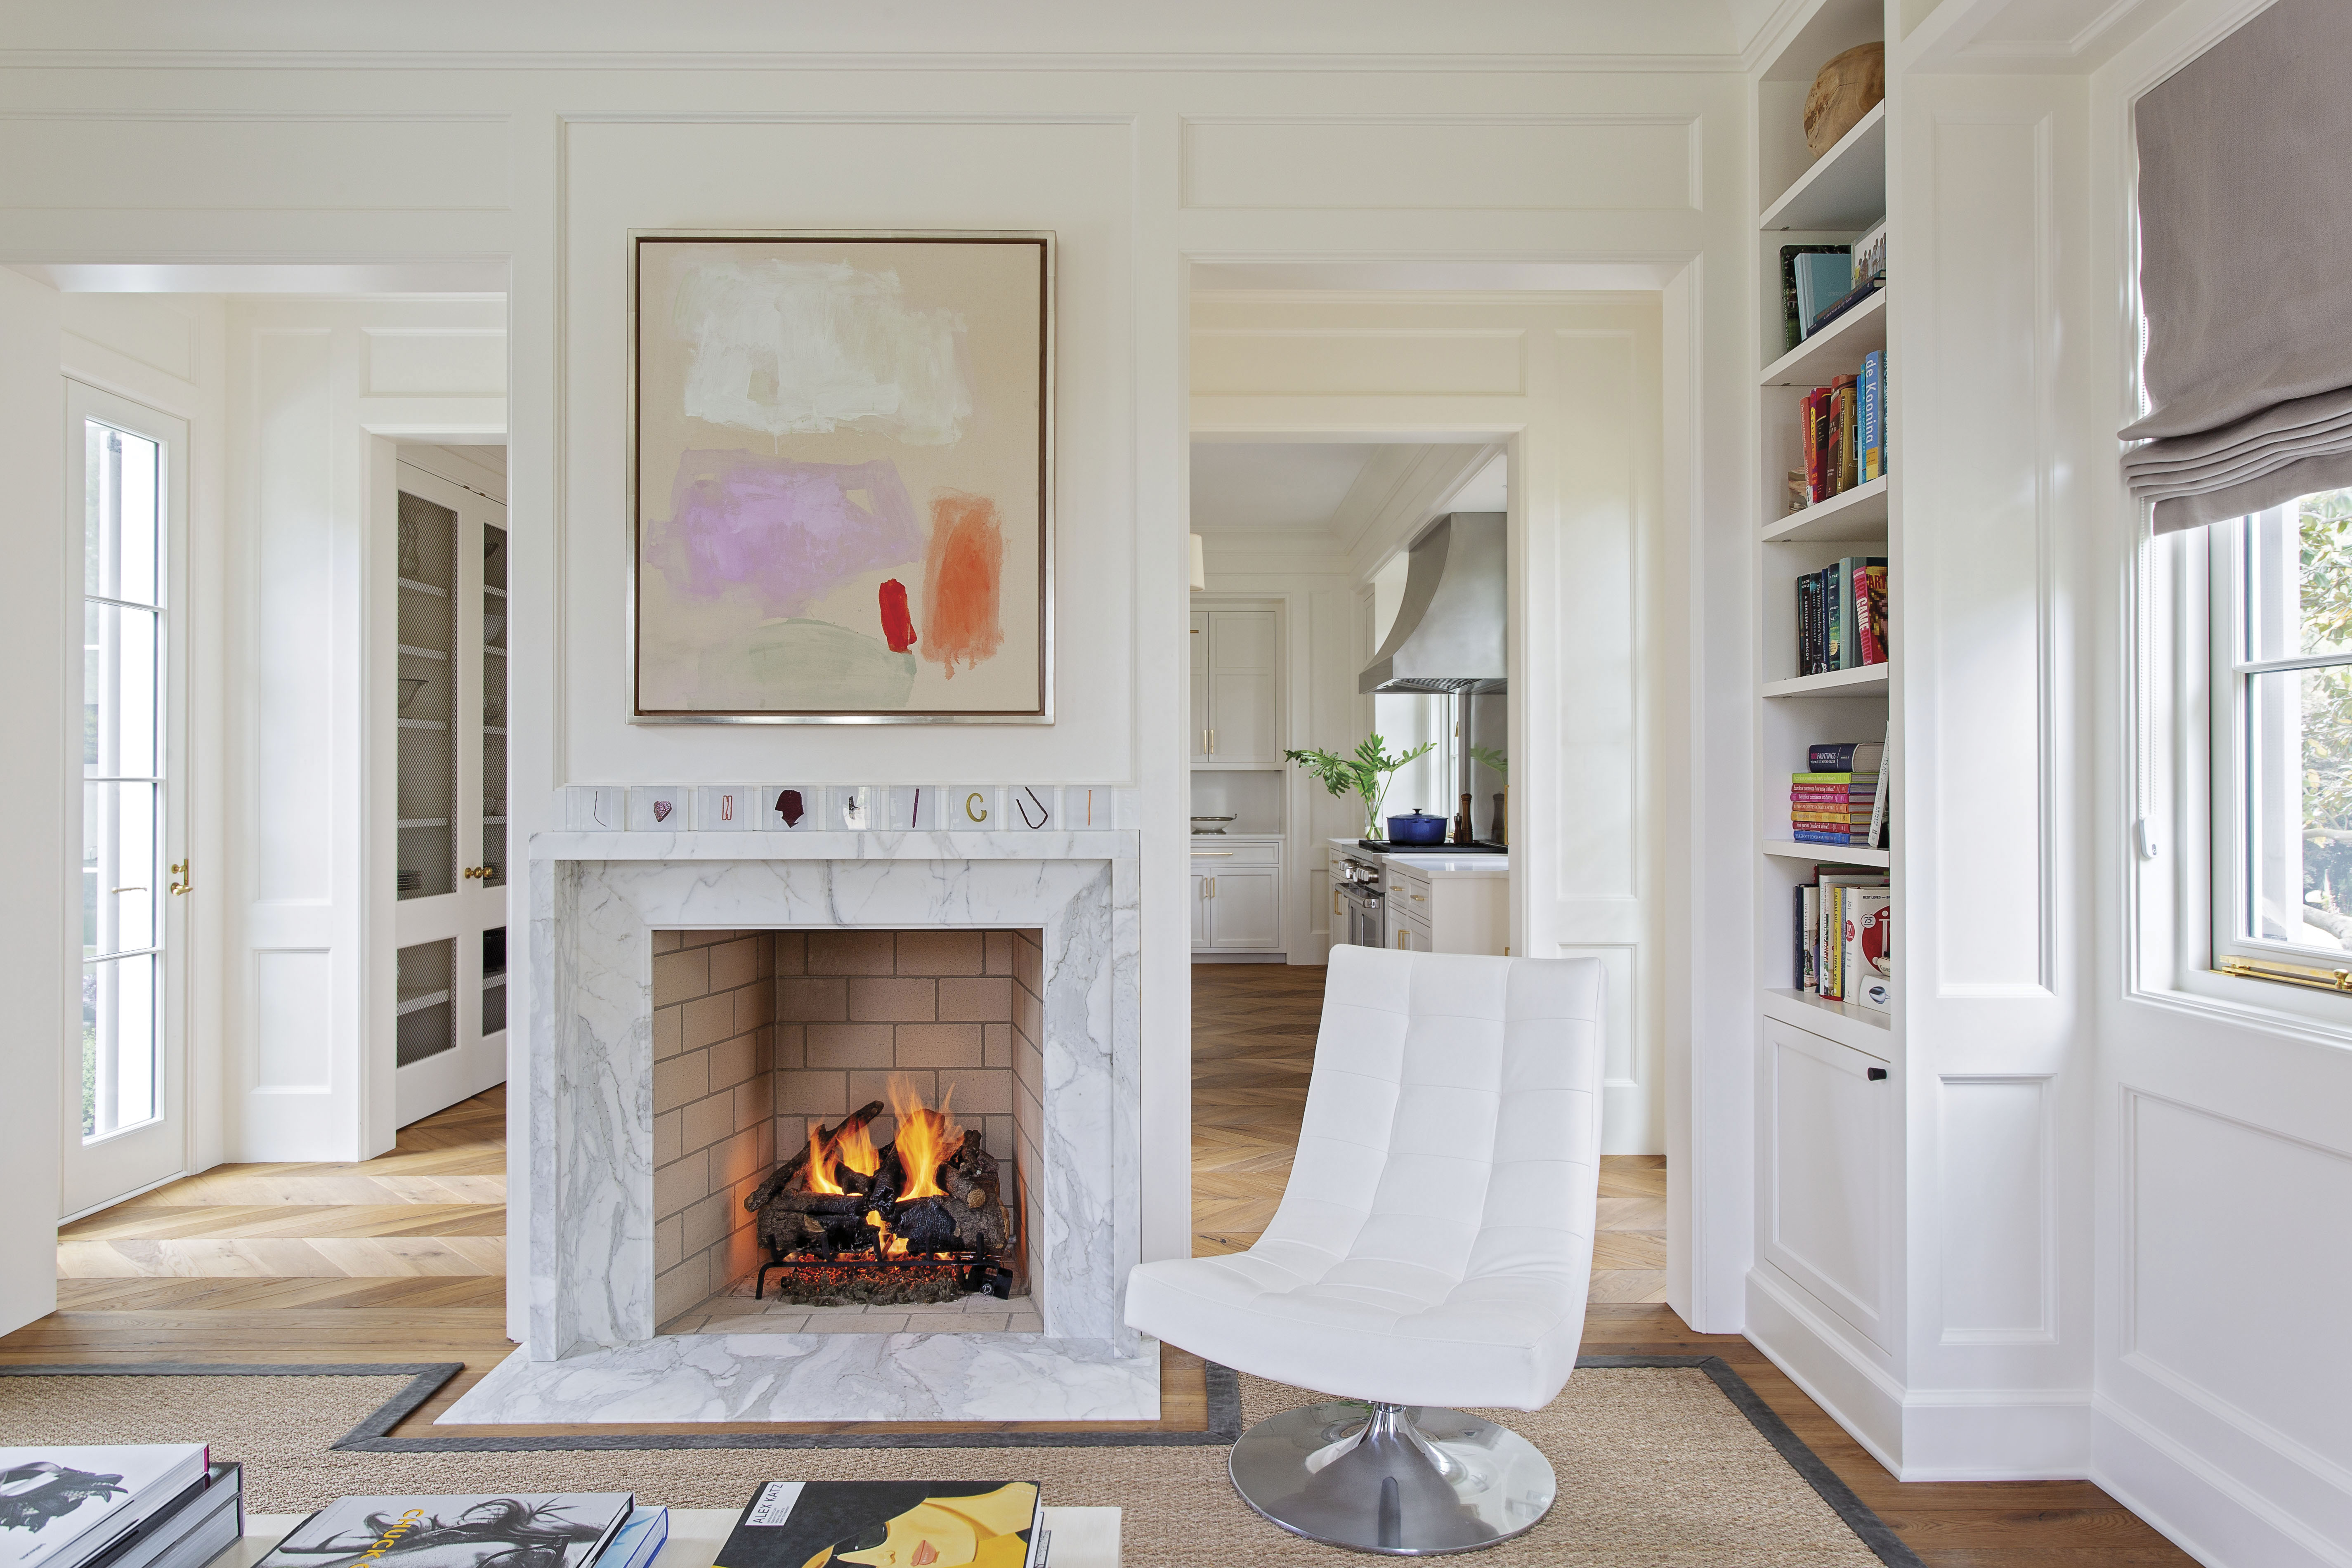 A fireplace in the family room adds to the casual coziness of the space.